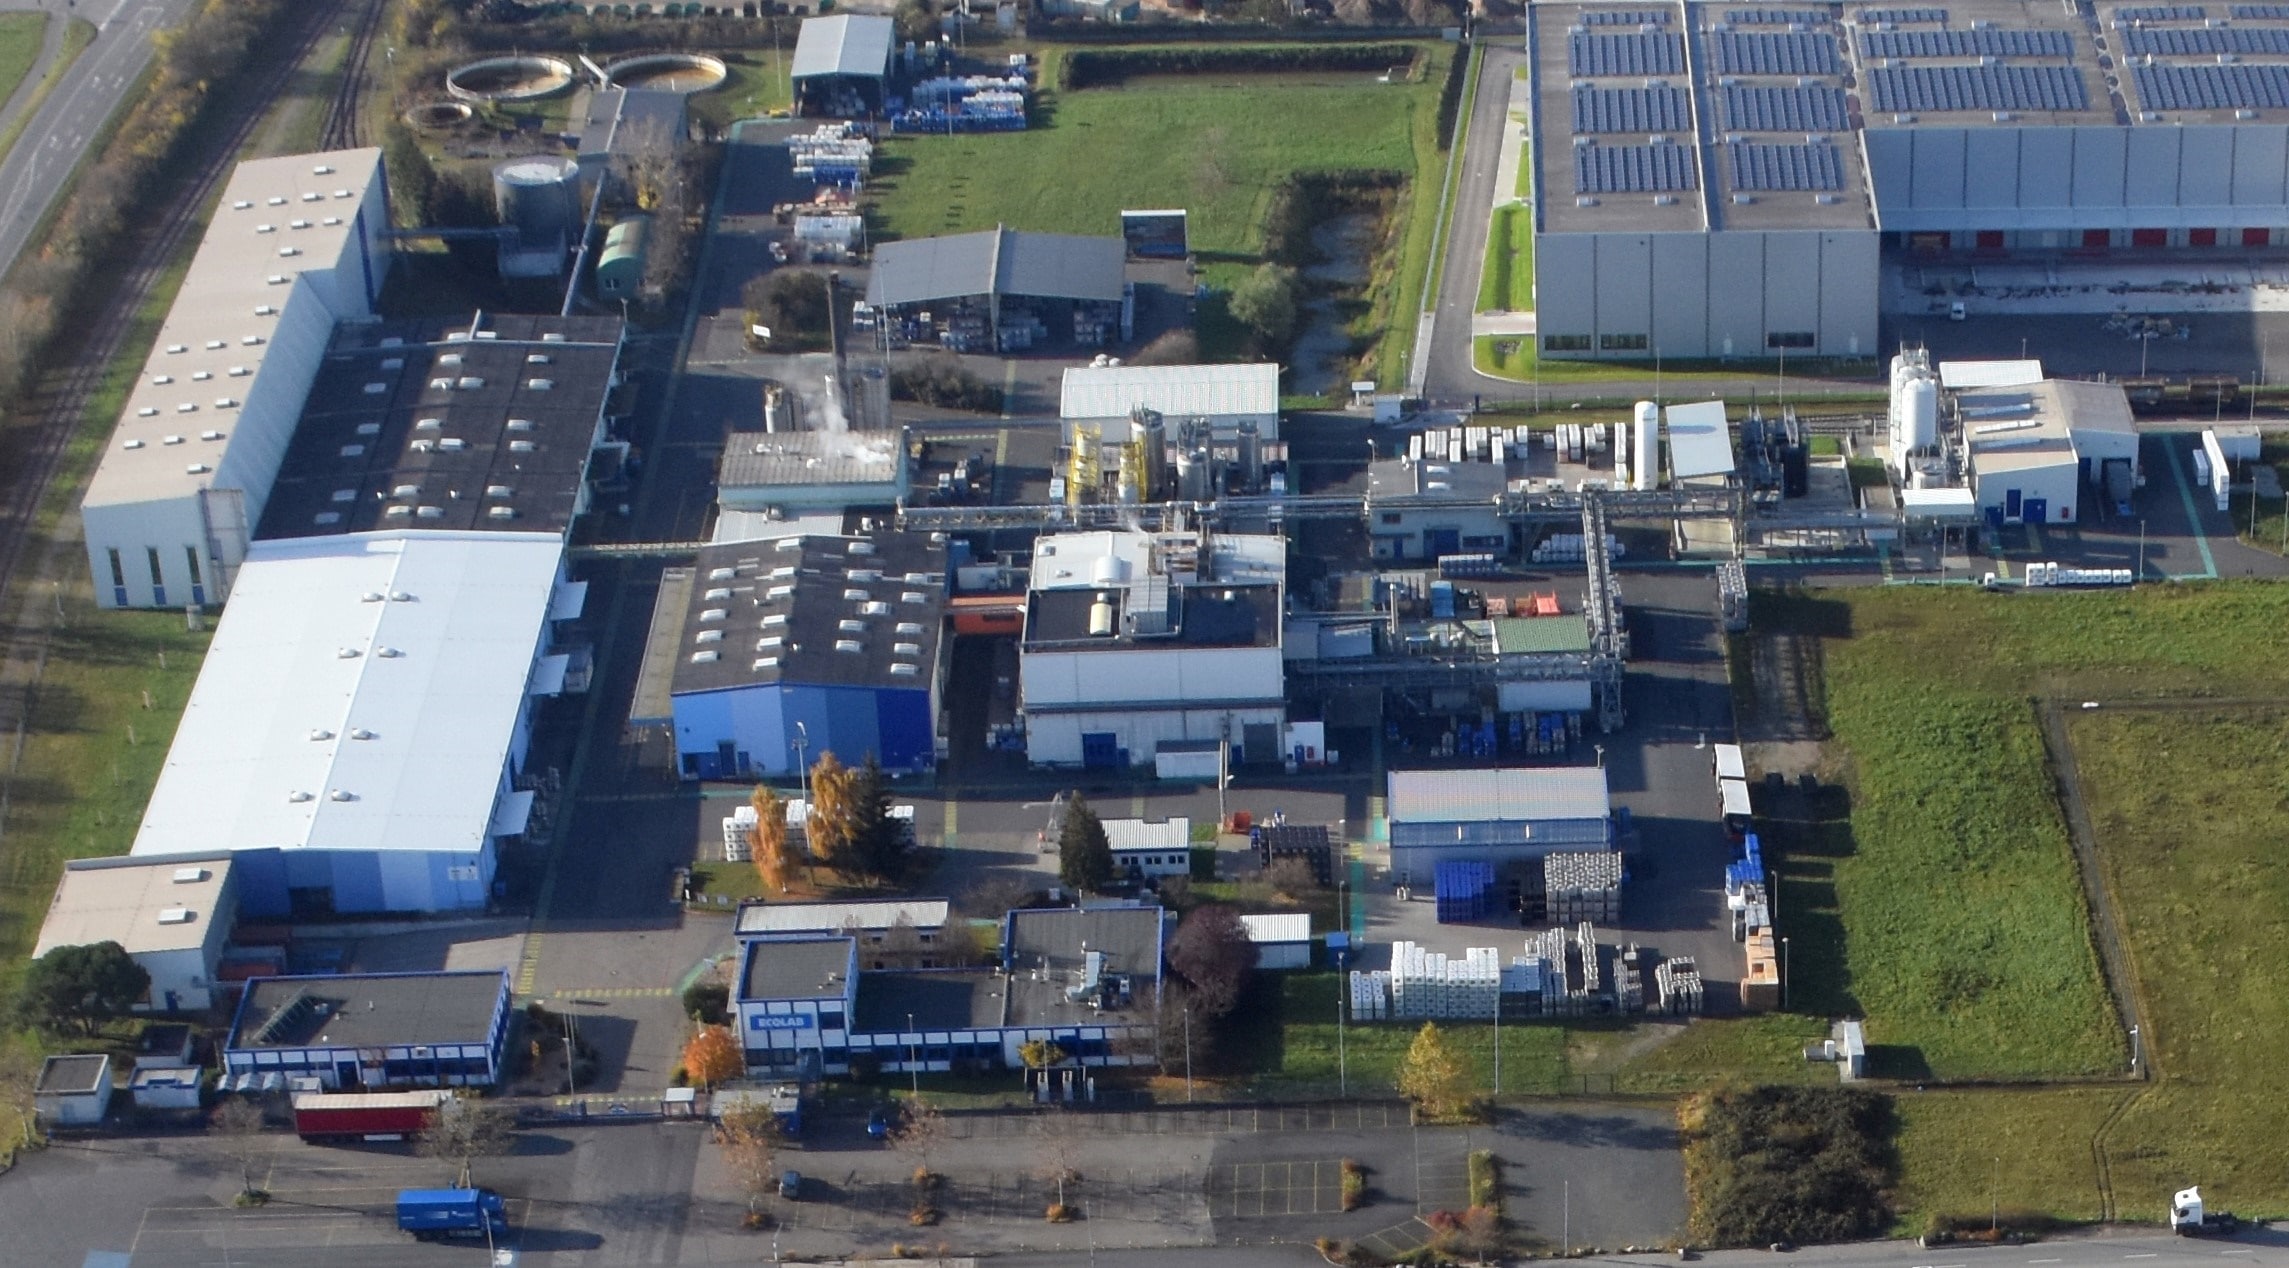 Aerial view of Plant in germany